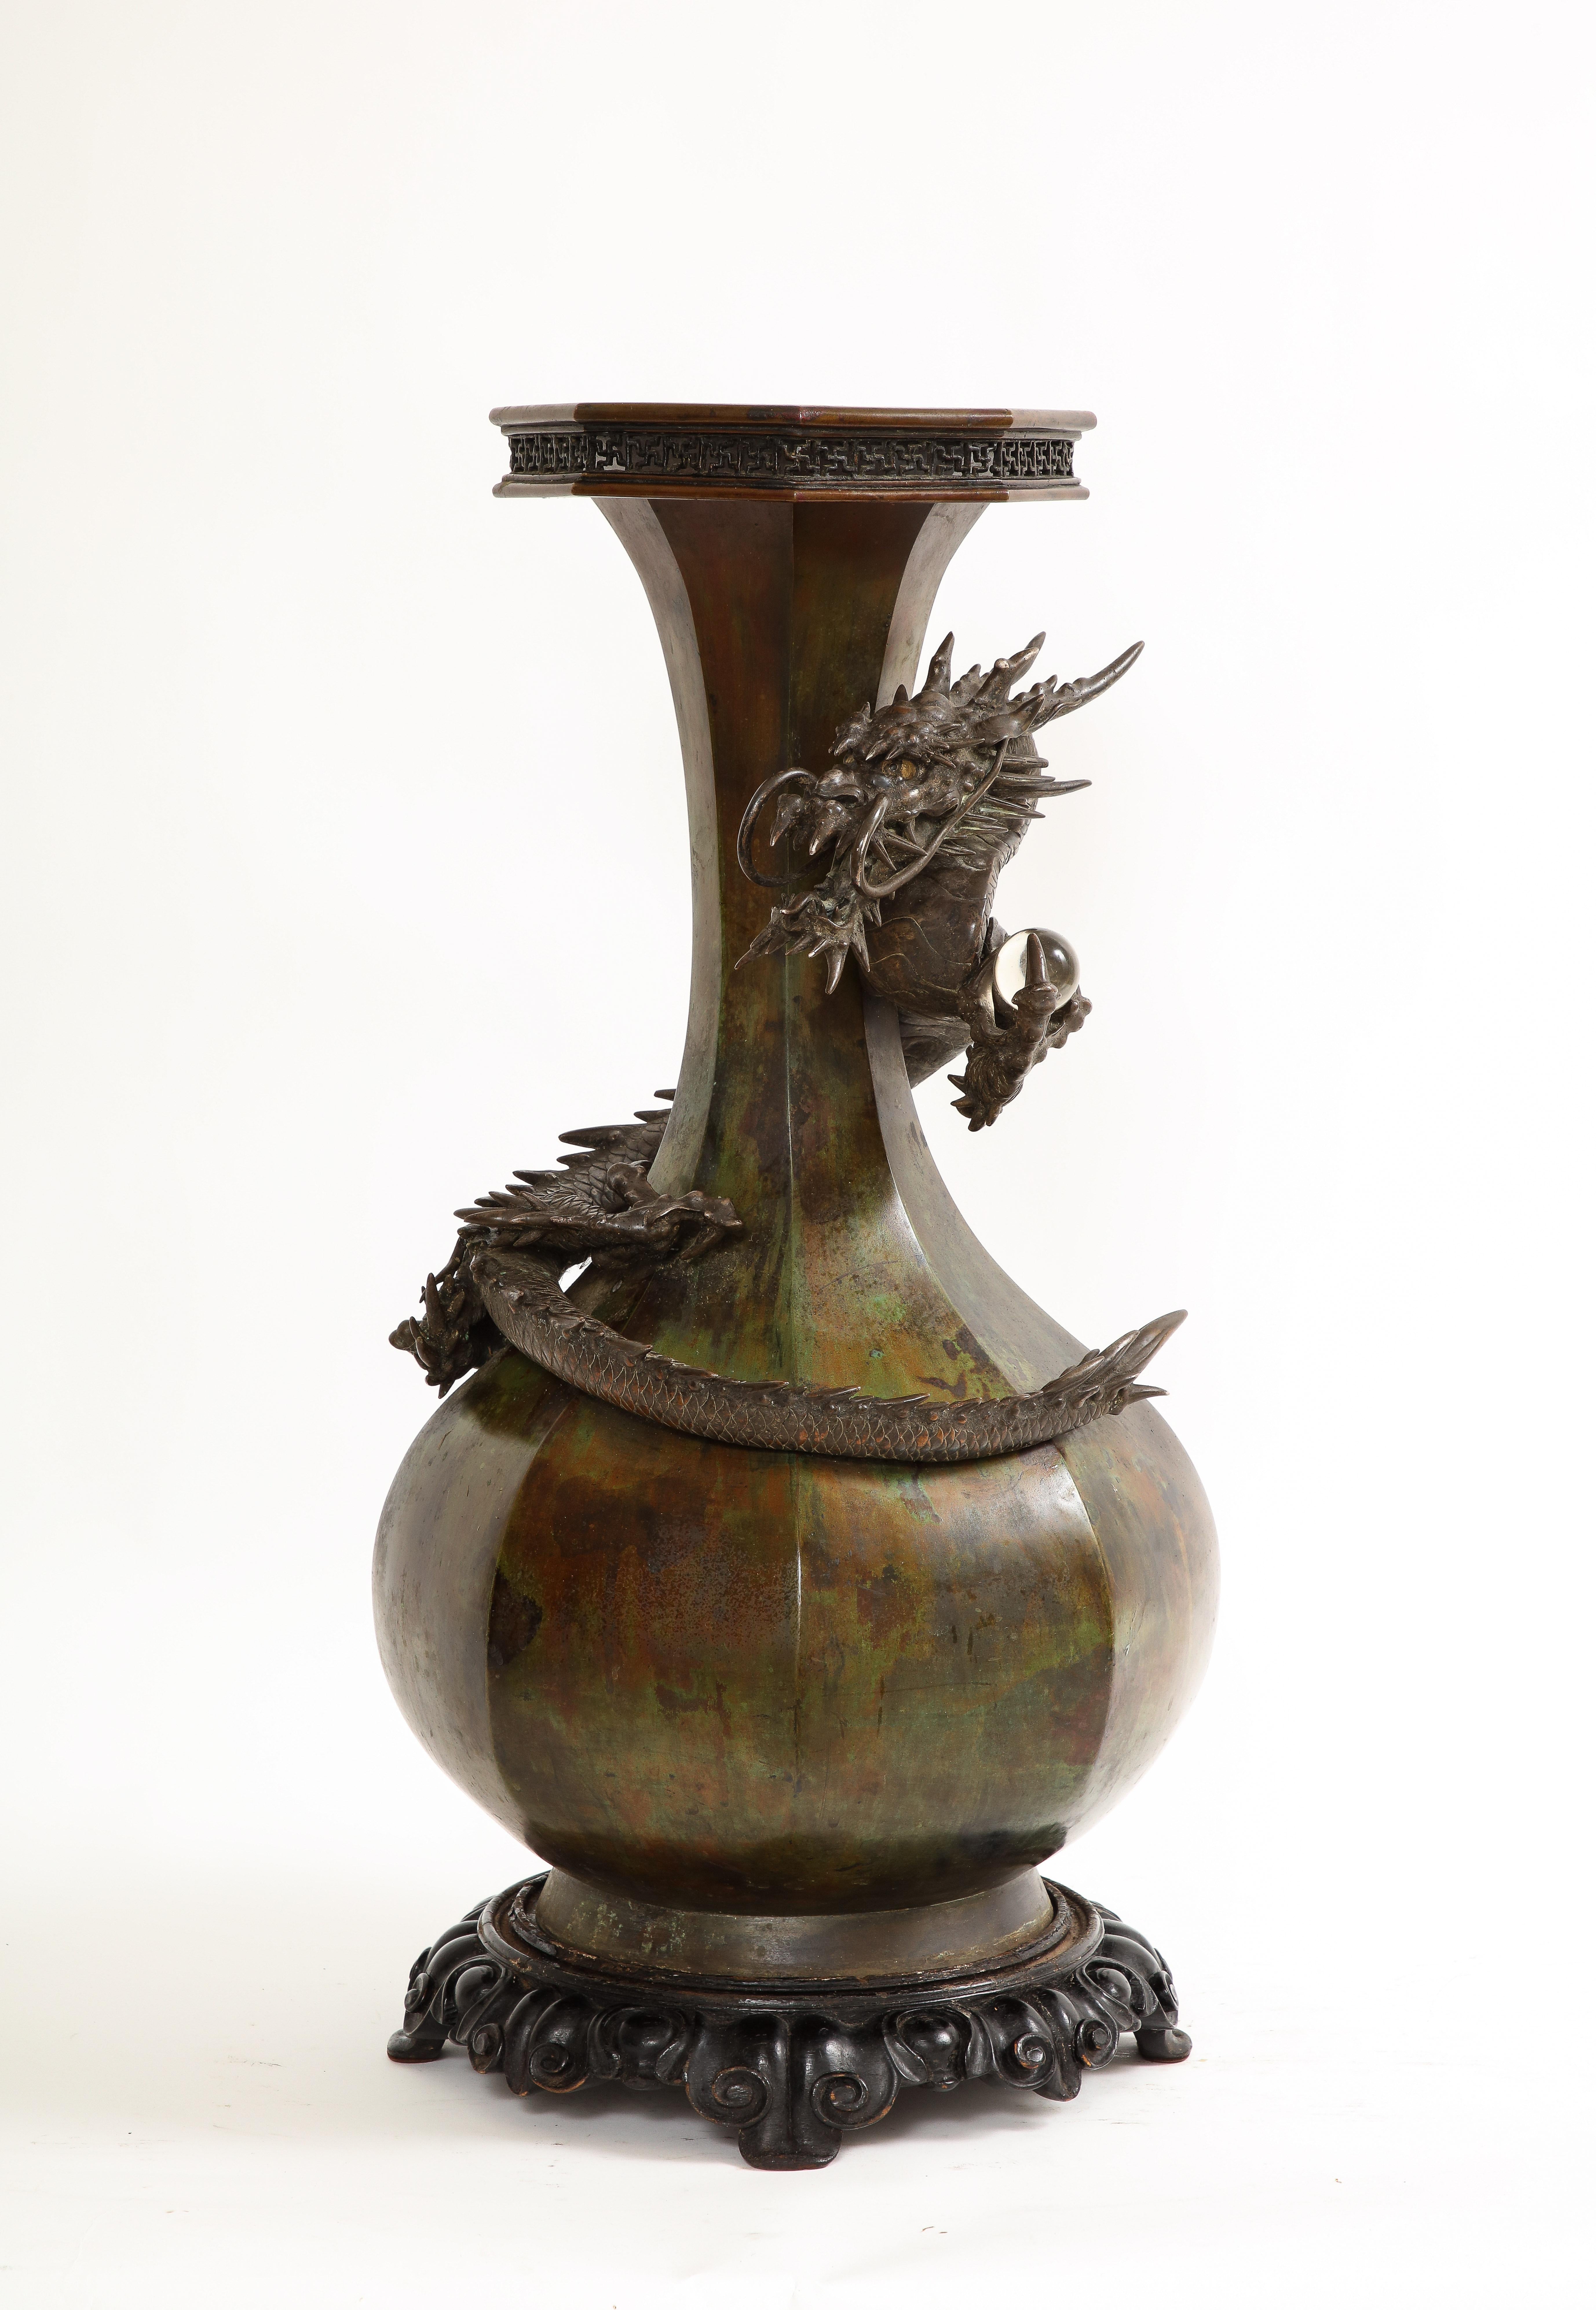 A Fantastic Japanese Meji Period Patinated Bronze Dragon Vase.  This vase is both elegant and awe-inspiring specifically for its Size and shape. The very large vase is wrapped around with a Ryu dragon that is entwined in high relief and with great